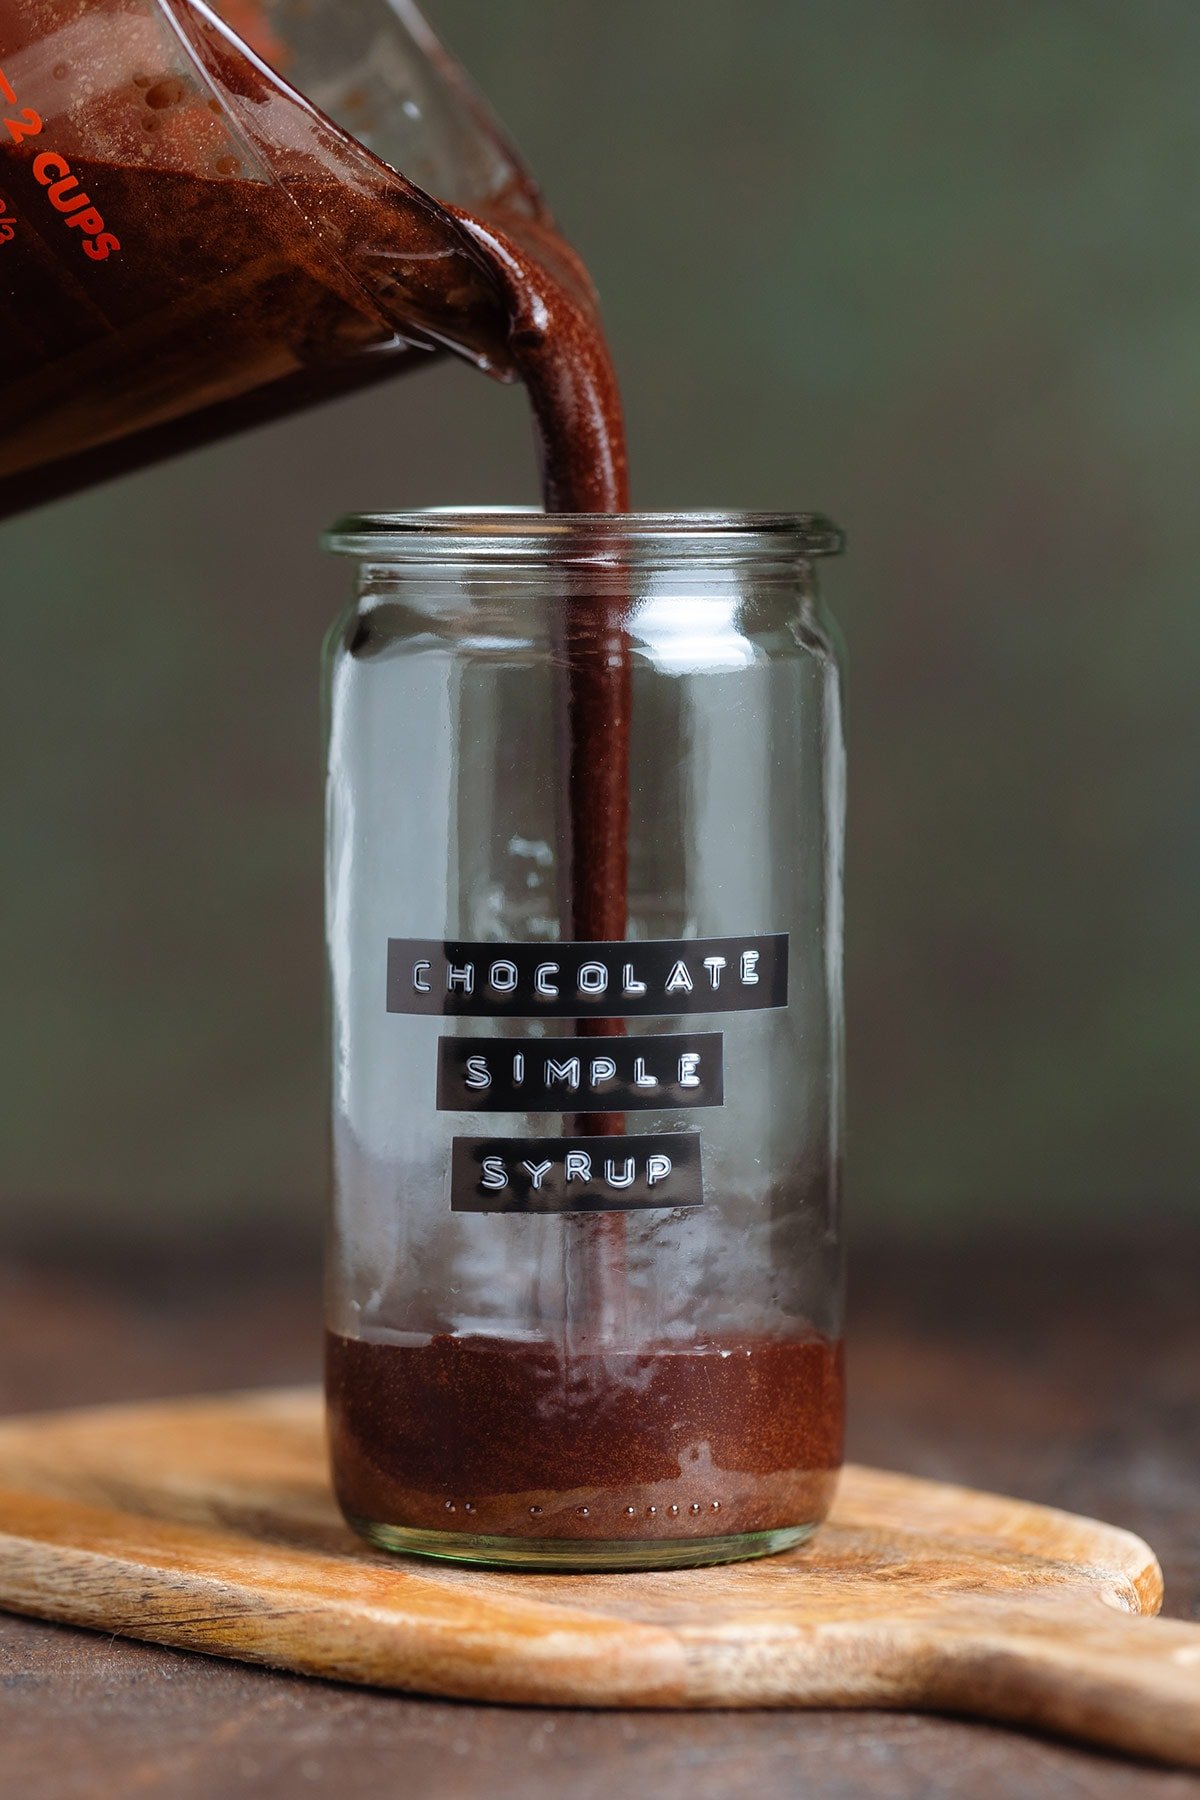 Chocolate syrup being poured into a medium glass jar with a black and white embossed label, on a dark wooden background.